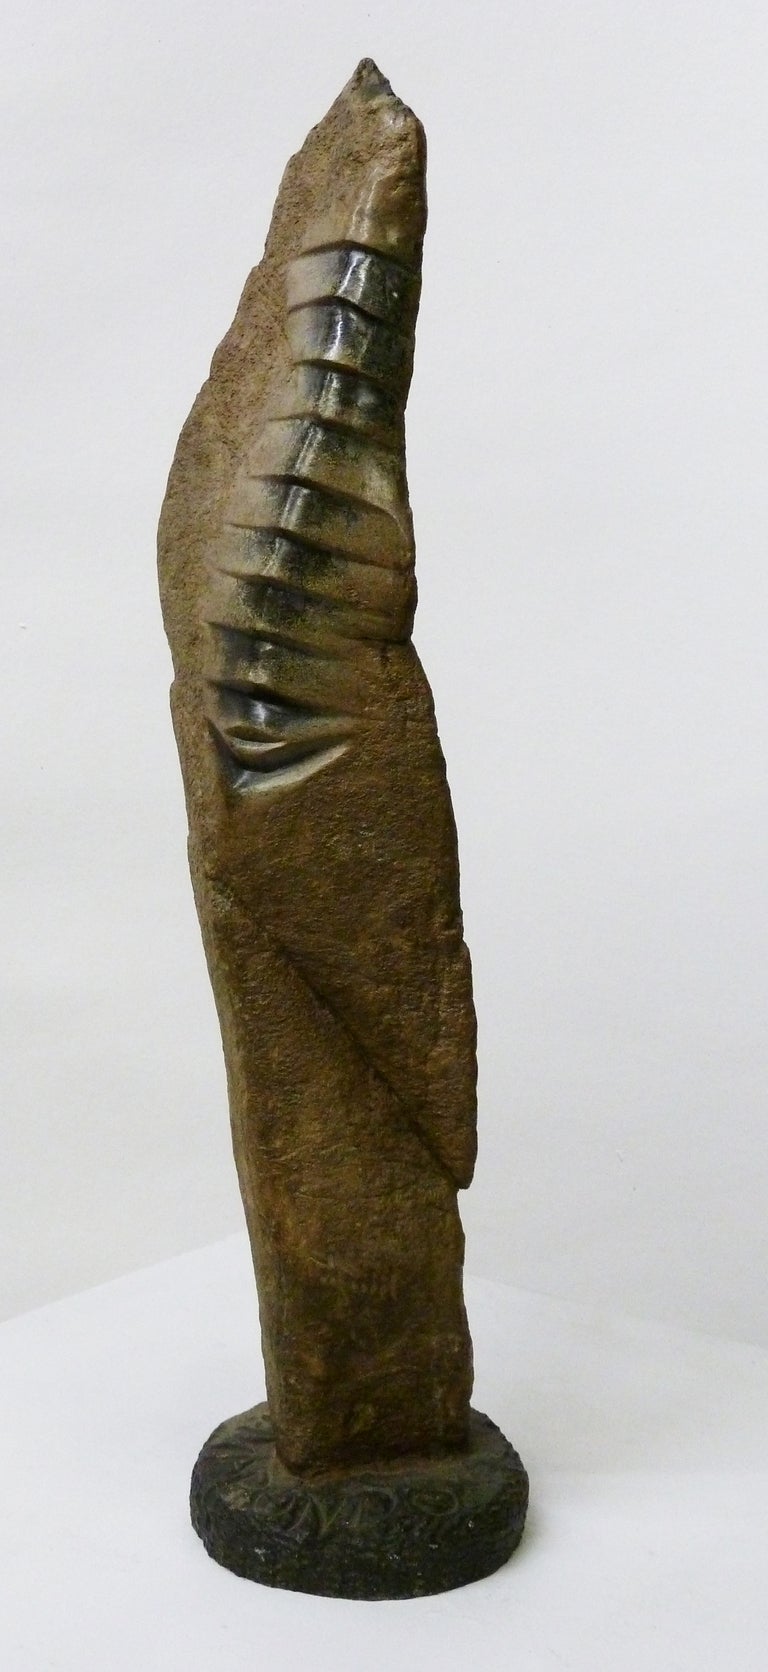 This evocative sculpture by famed Zimbabwe artist Wilbert Mapundo features rough stone juxtaposed by smoothly finished suture or vertebrae-like marks along the side. It is signed at the base.